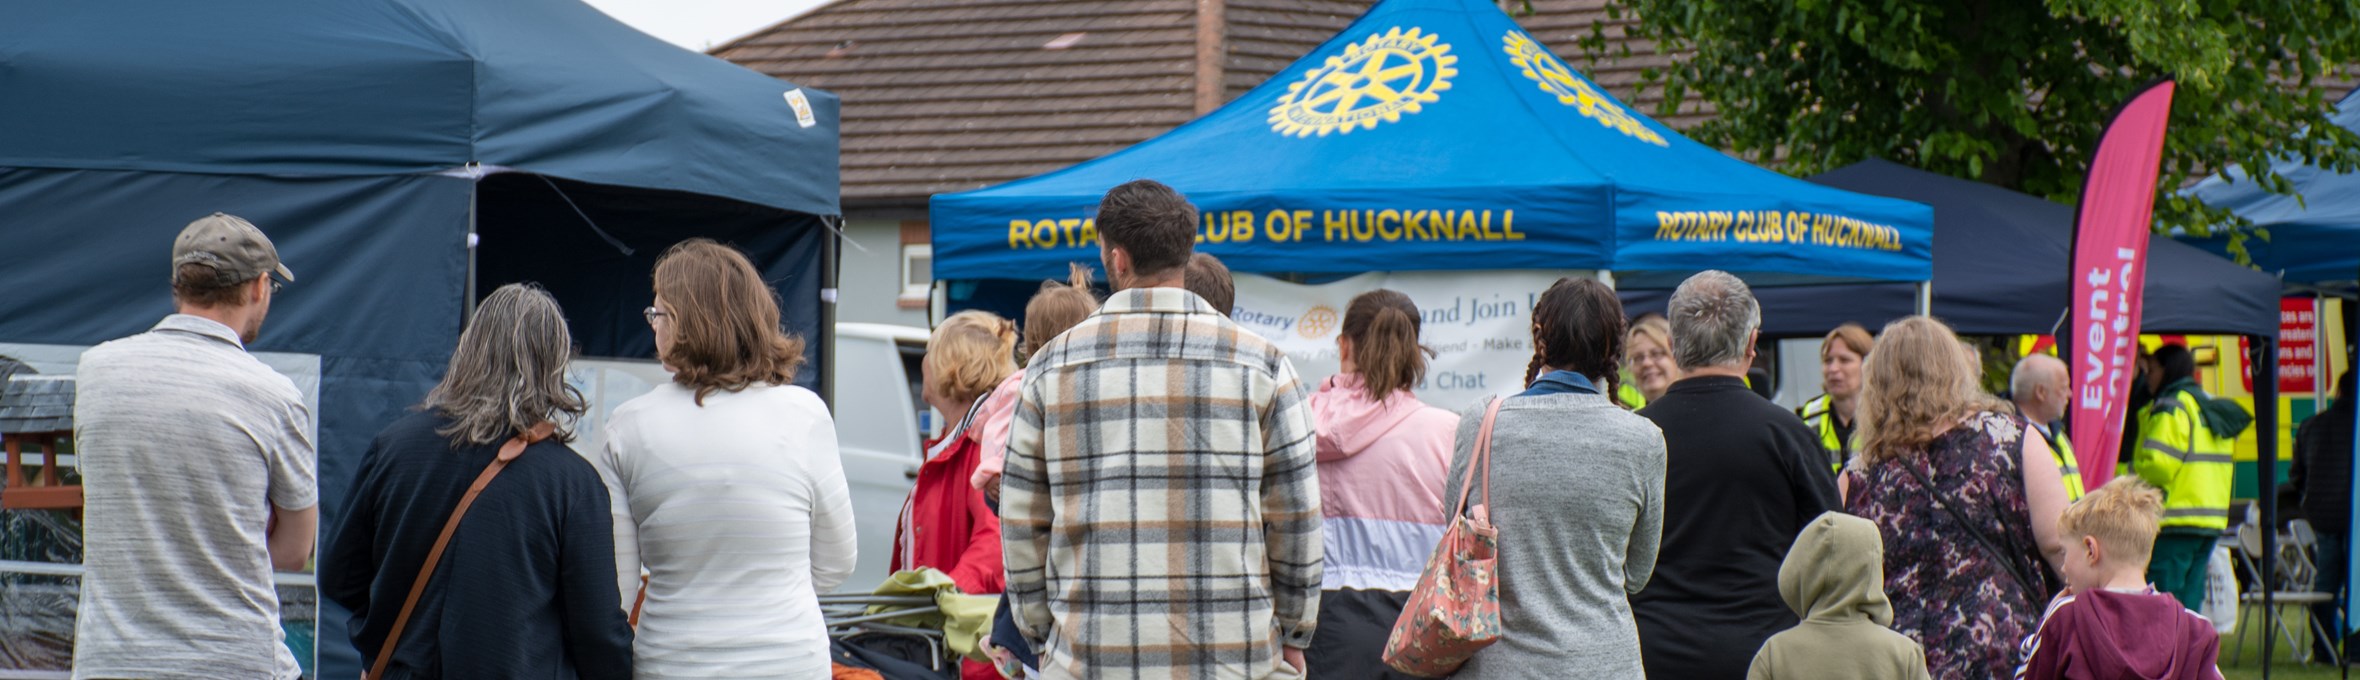 Crowds browsing the market stalls at Titchfield Park 